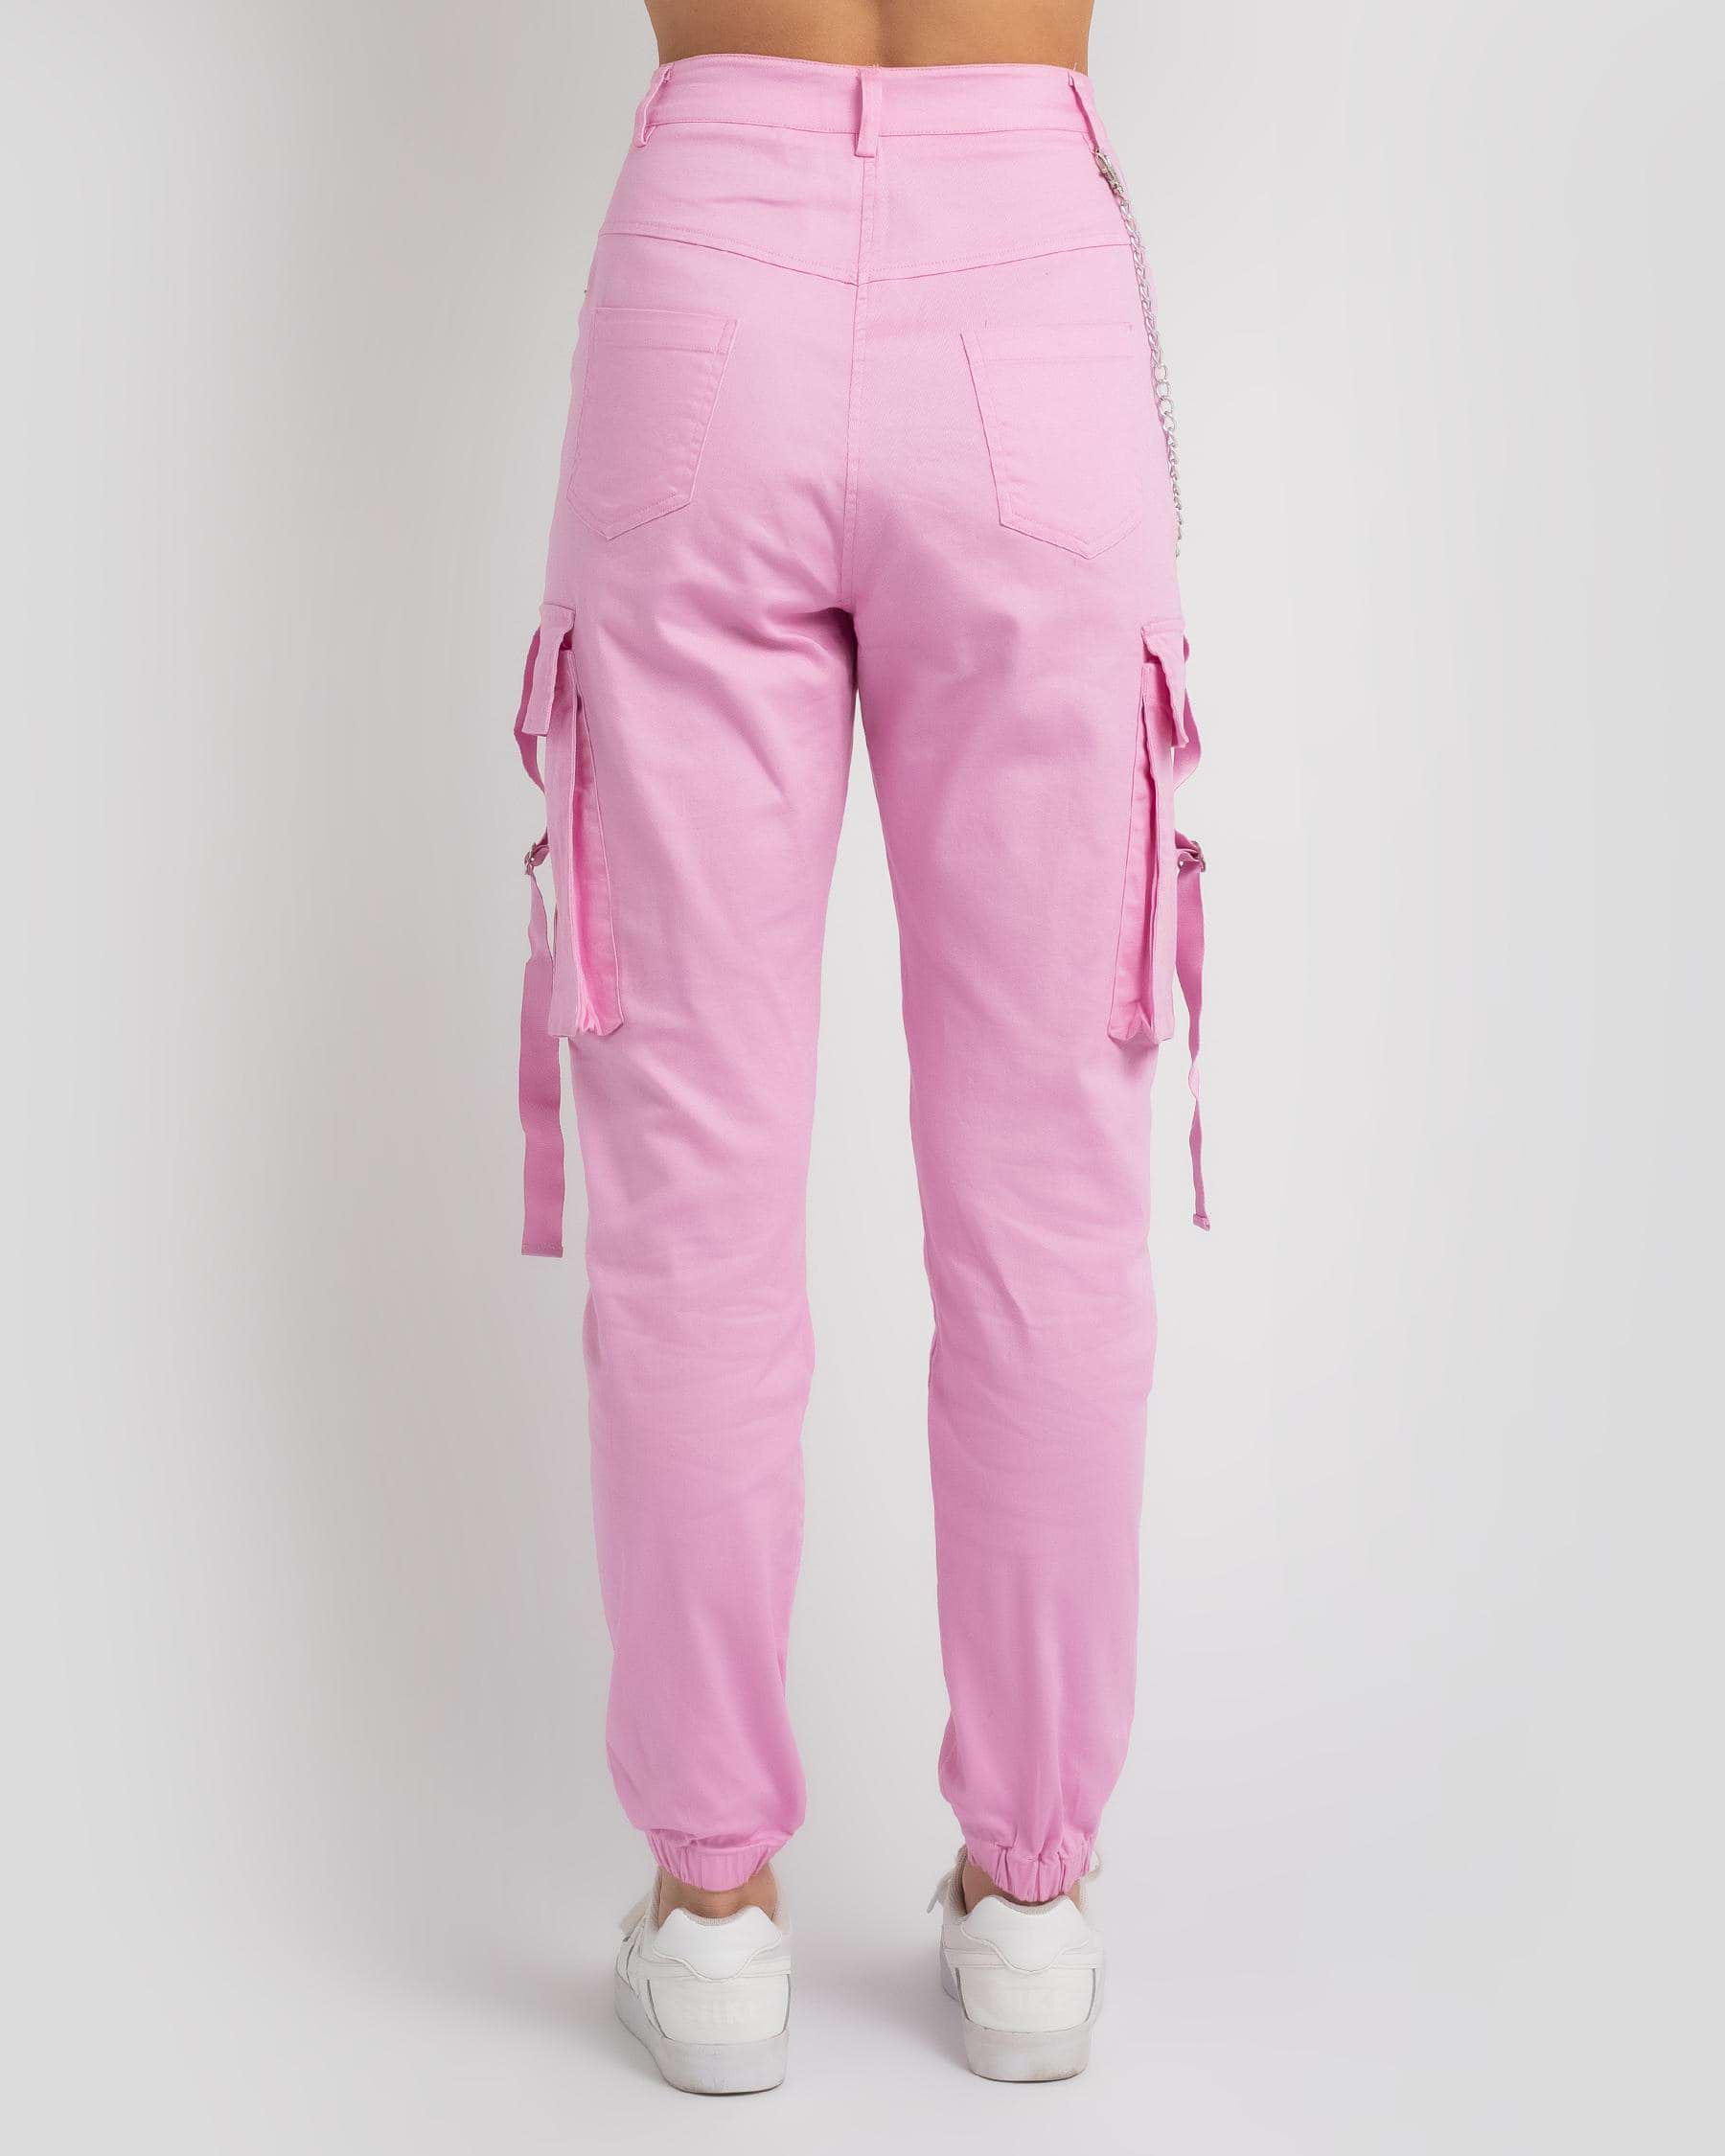 Shop Ava And Ever Riri Pants In Pastel Pink - Fast Shipping & Easy ...